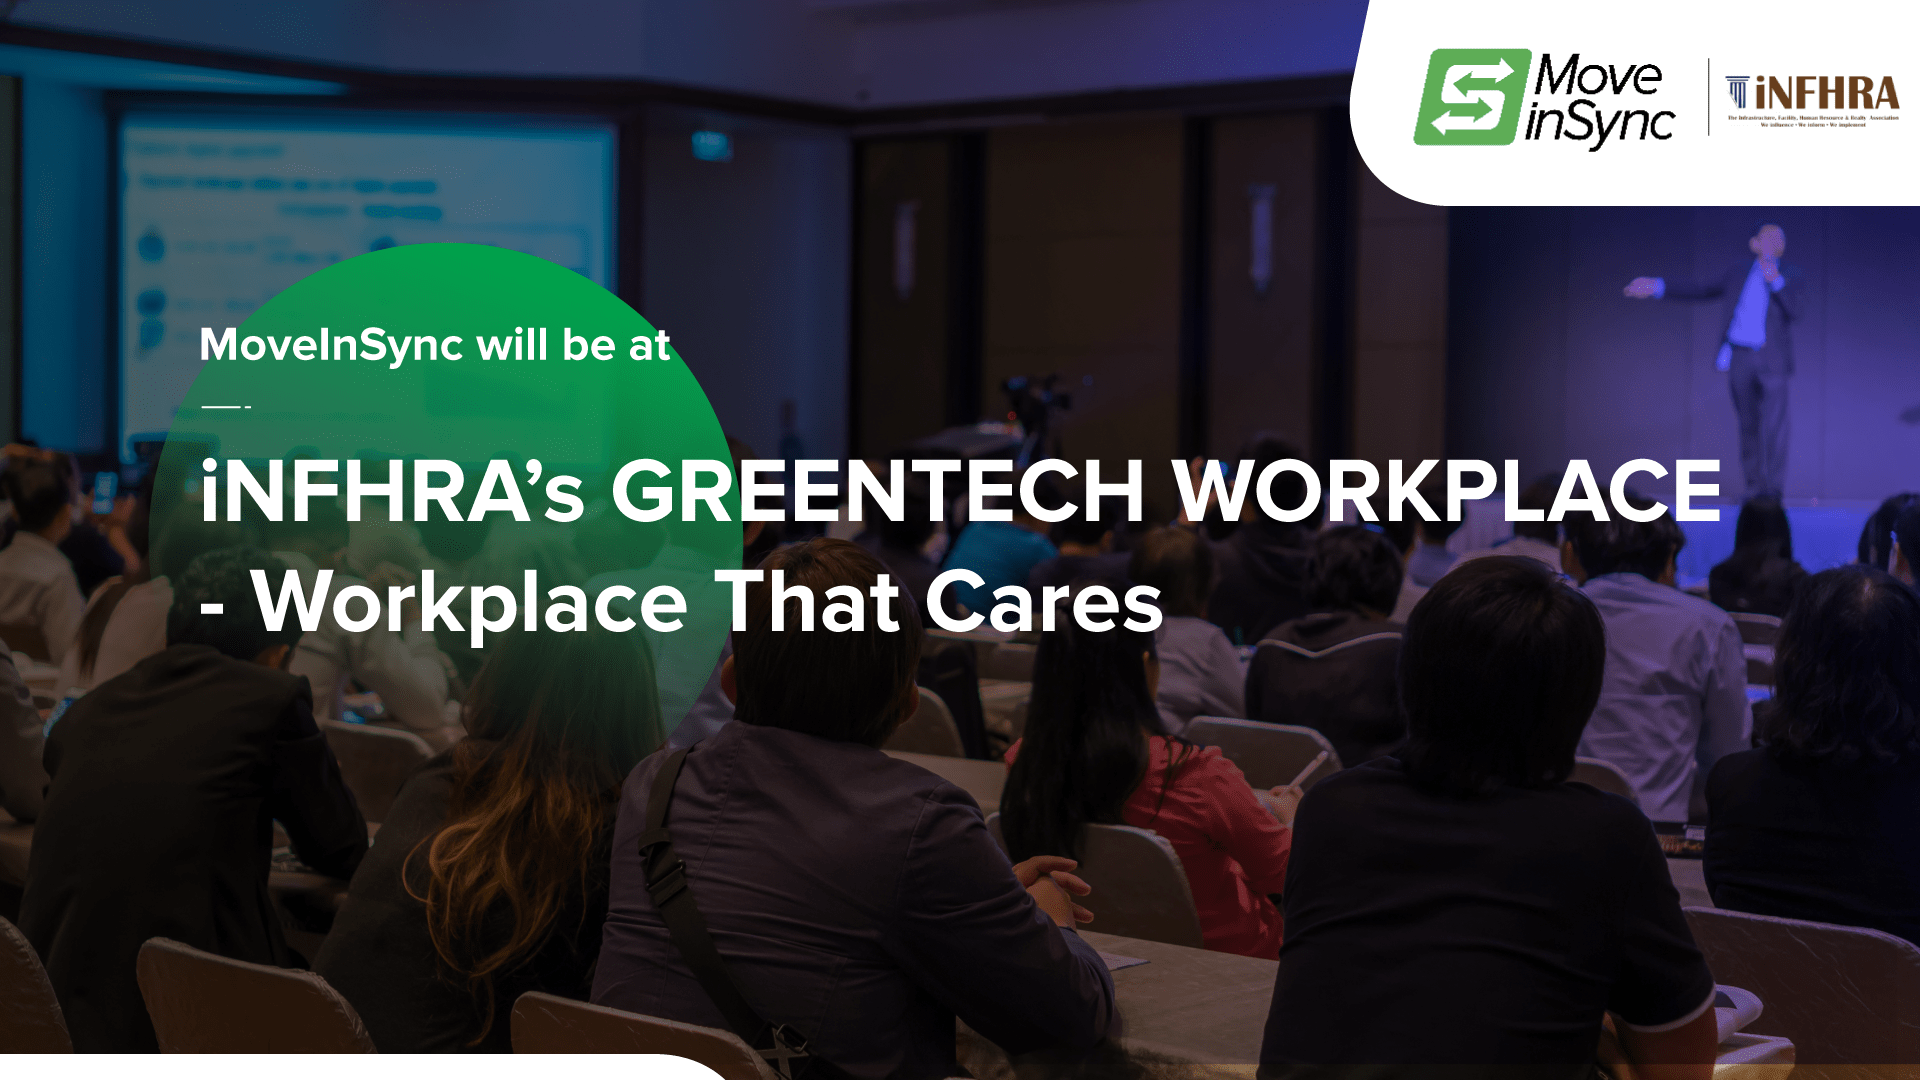 iNFHRA’s GREENTECH WORKPLACE – Workplace That Cares